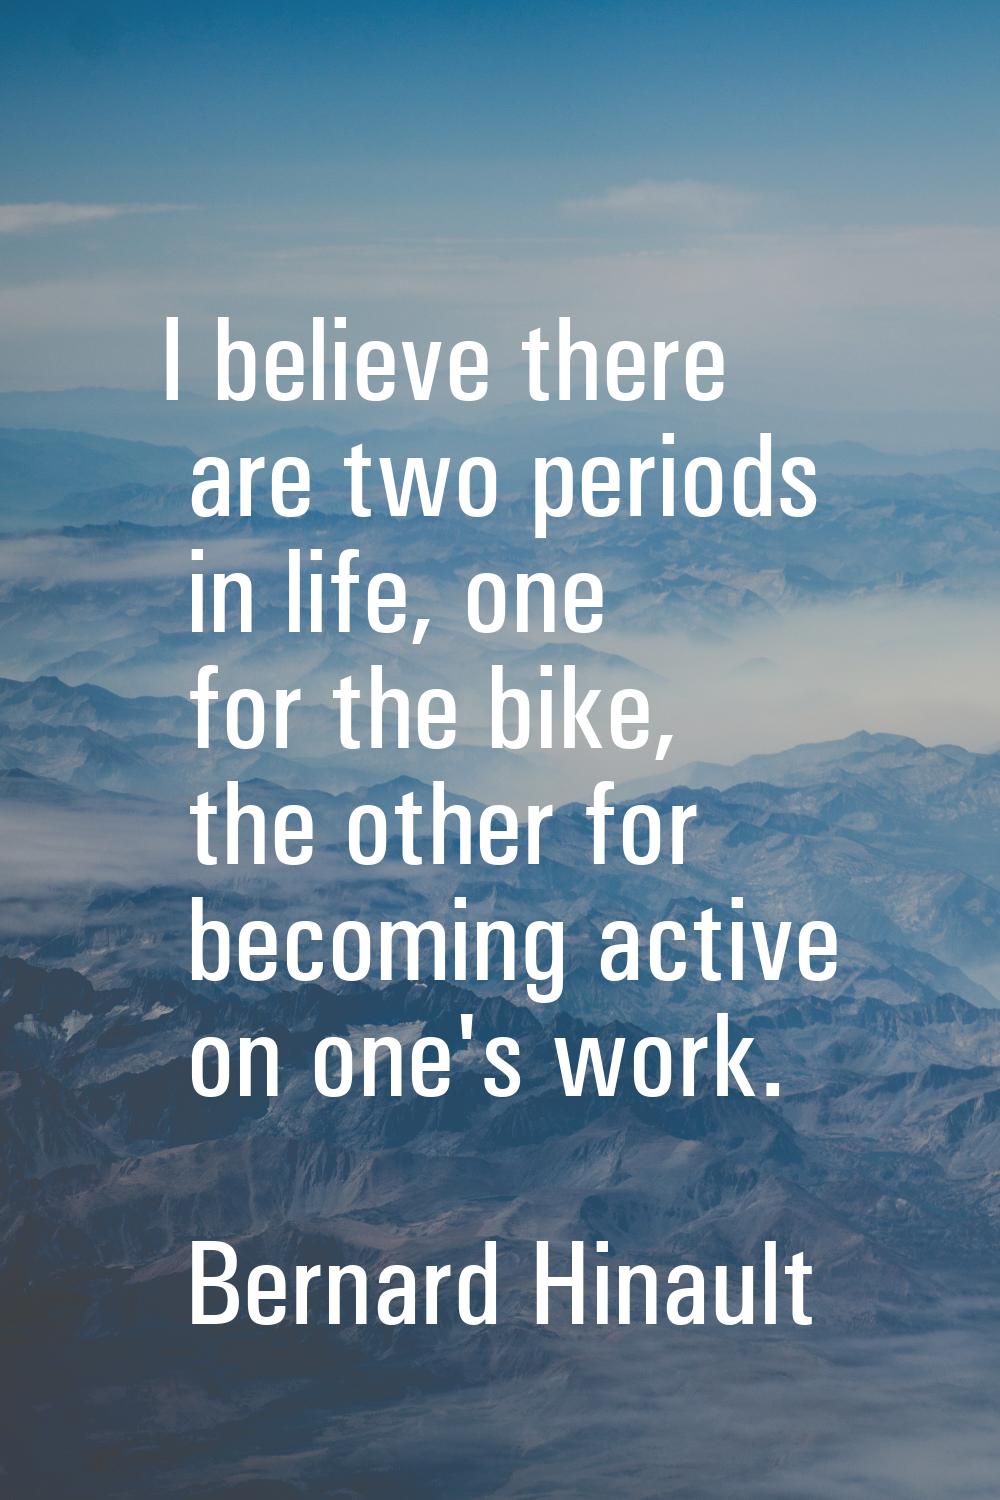 I believe there are two periods in life, one for the bike, the other for becoming active on one's w